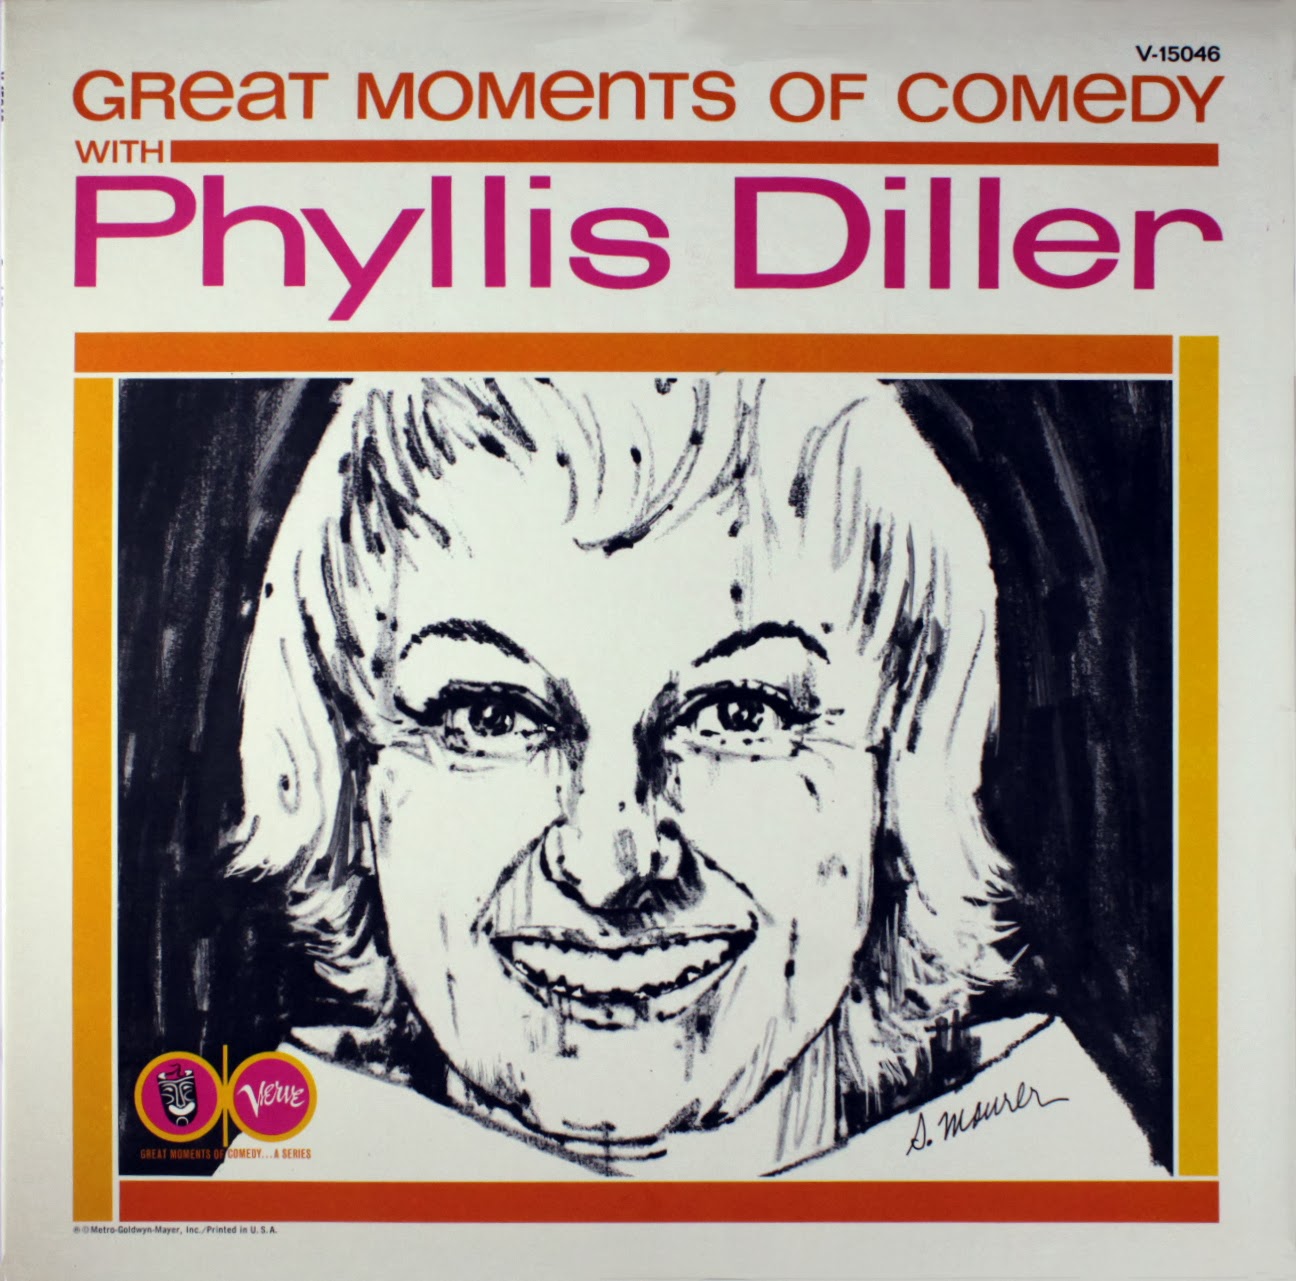 Phyllis+Diller+-+Great+Moments+Of+Comedy